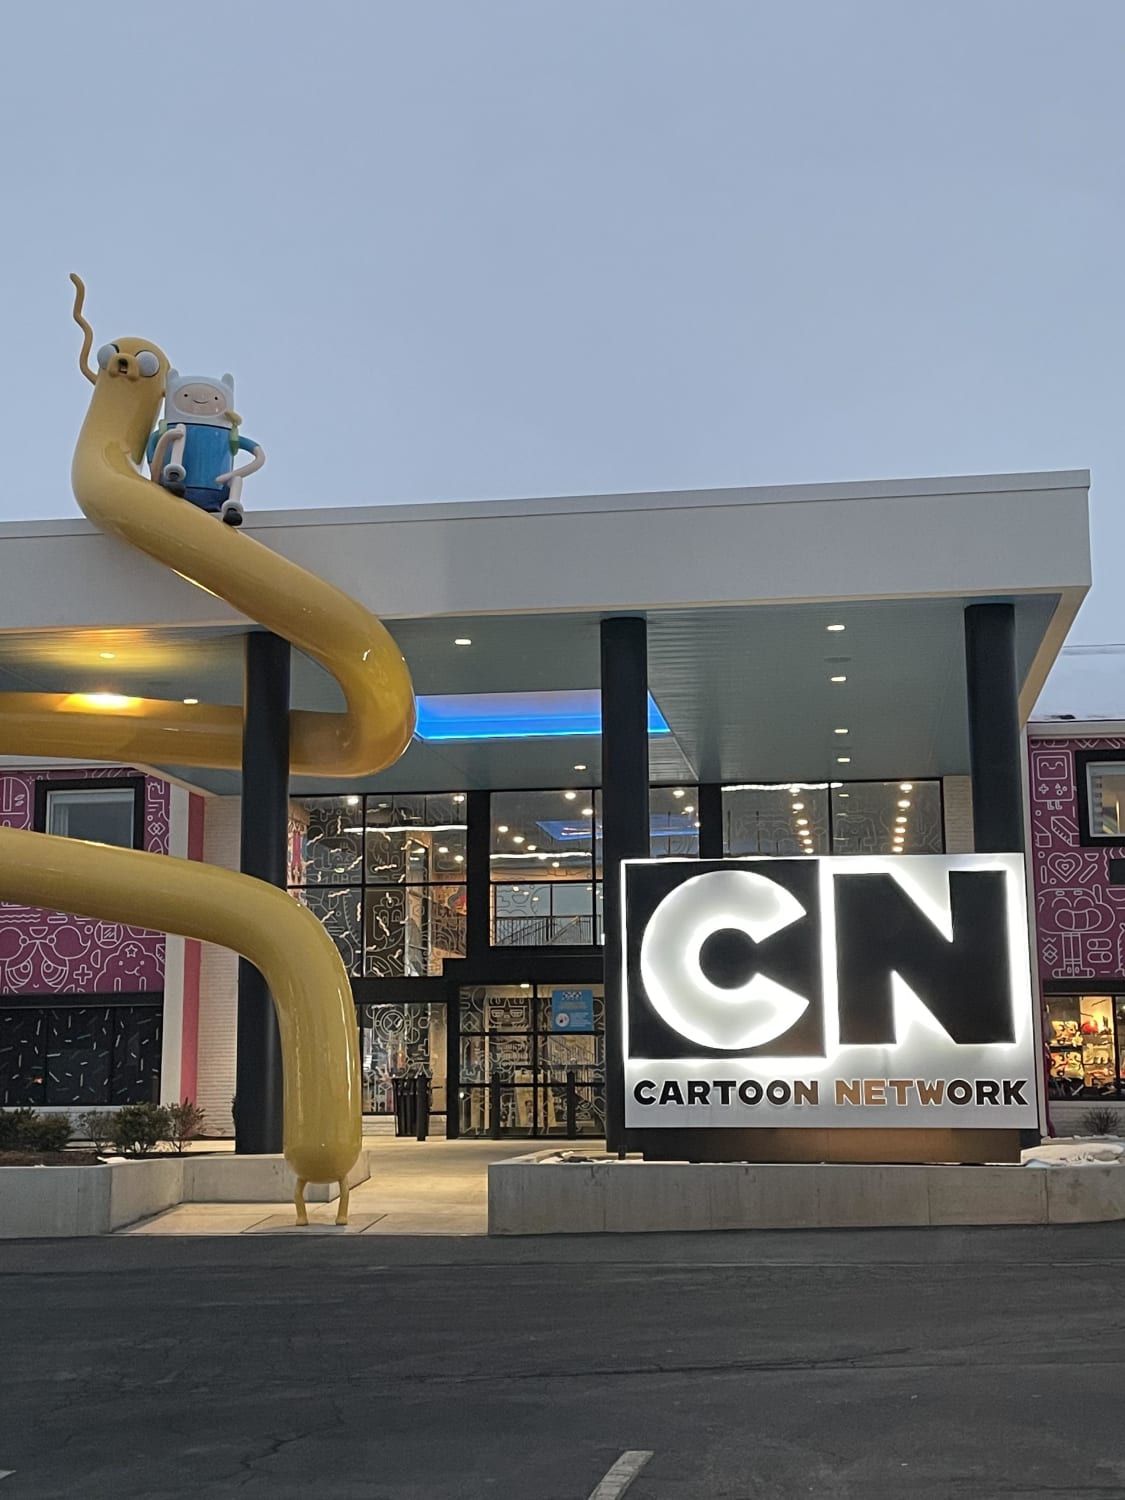 The Cartoon Network hotel located in Lancaster, PA